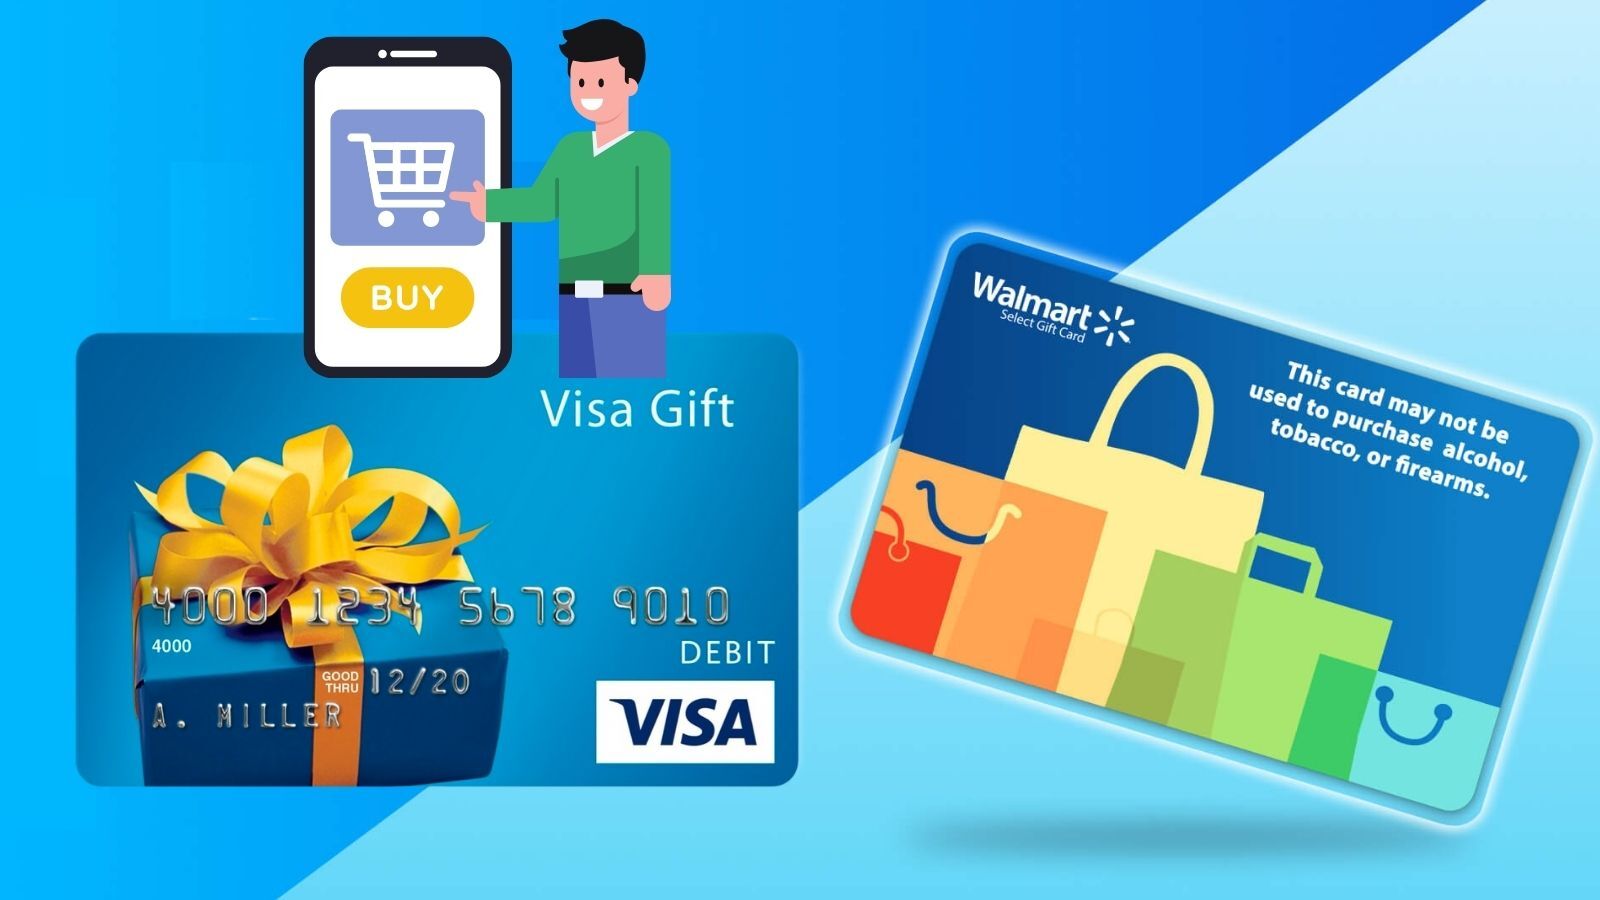 Can You Buy A Visa Gift Card With A Walmart Gift Card?